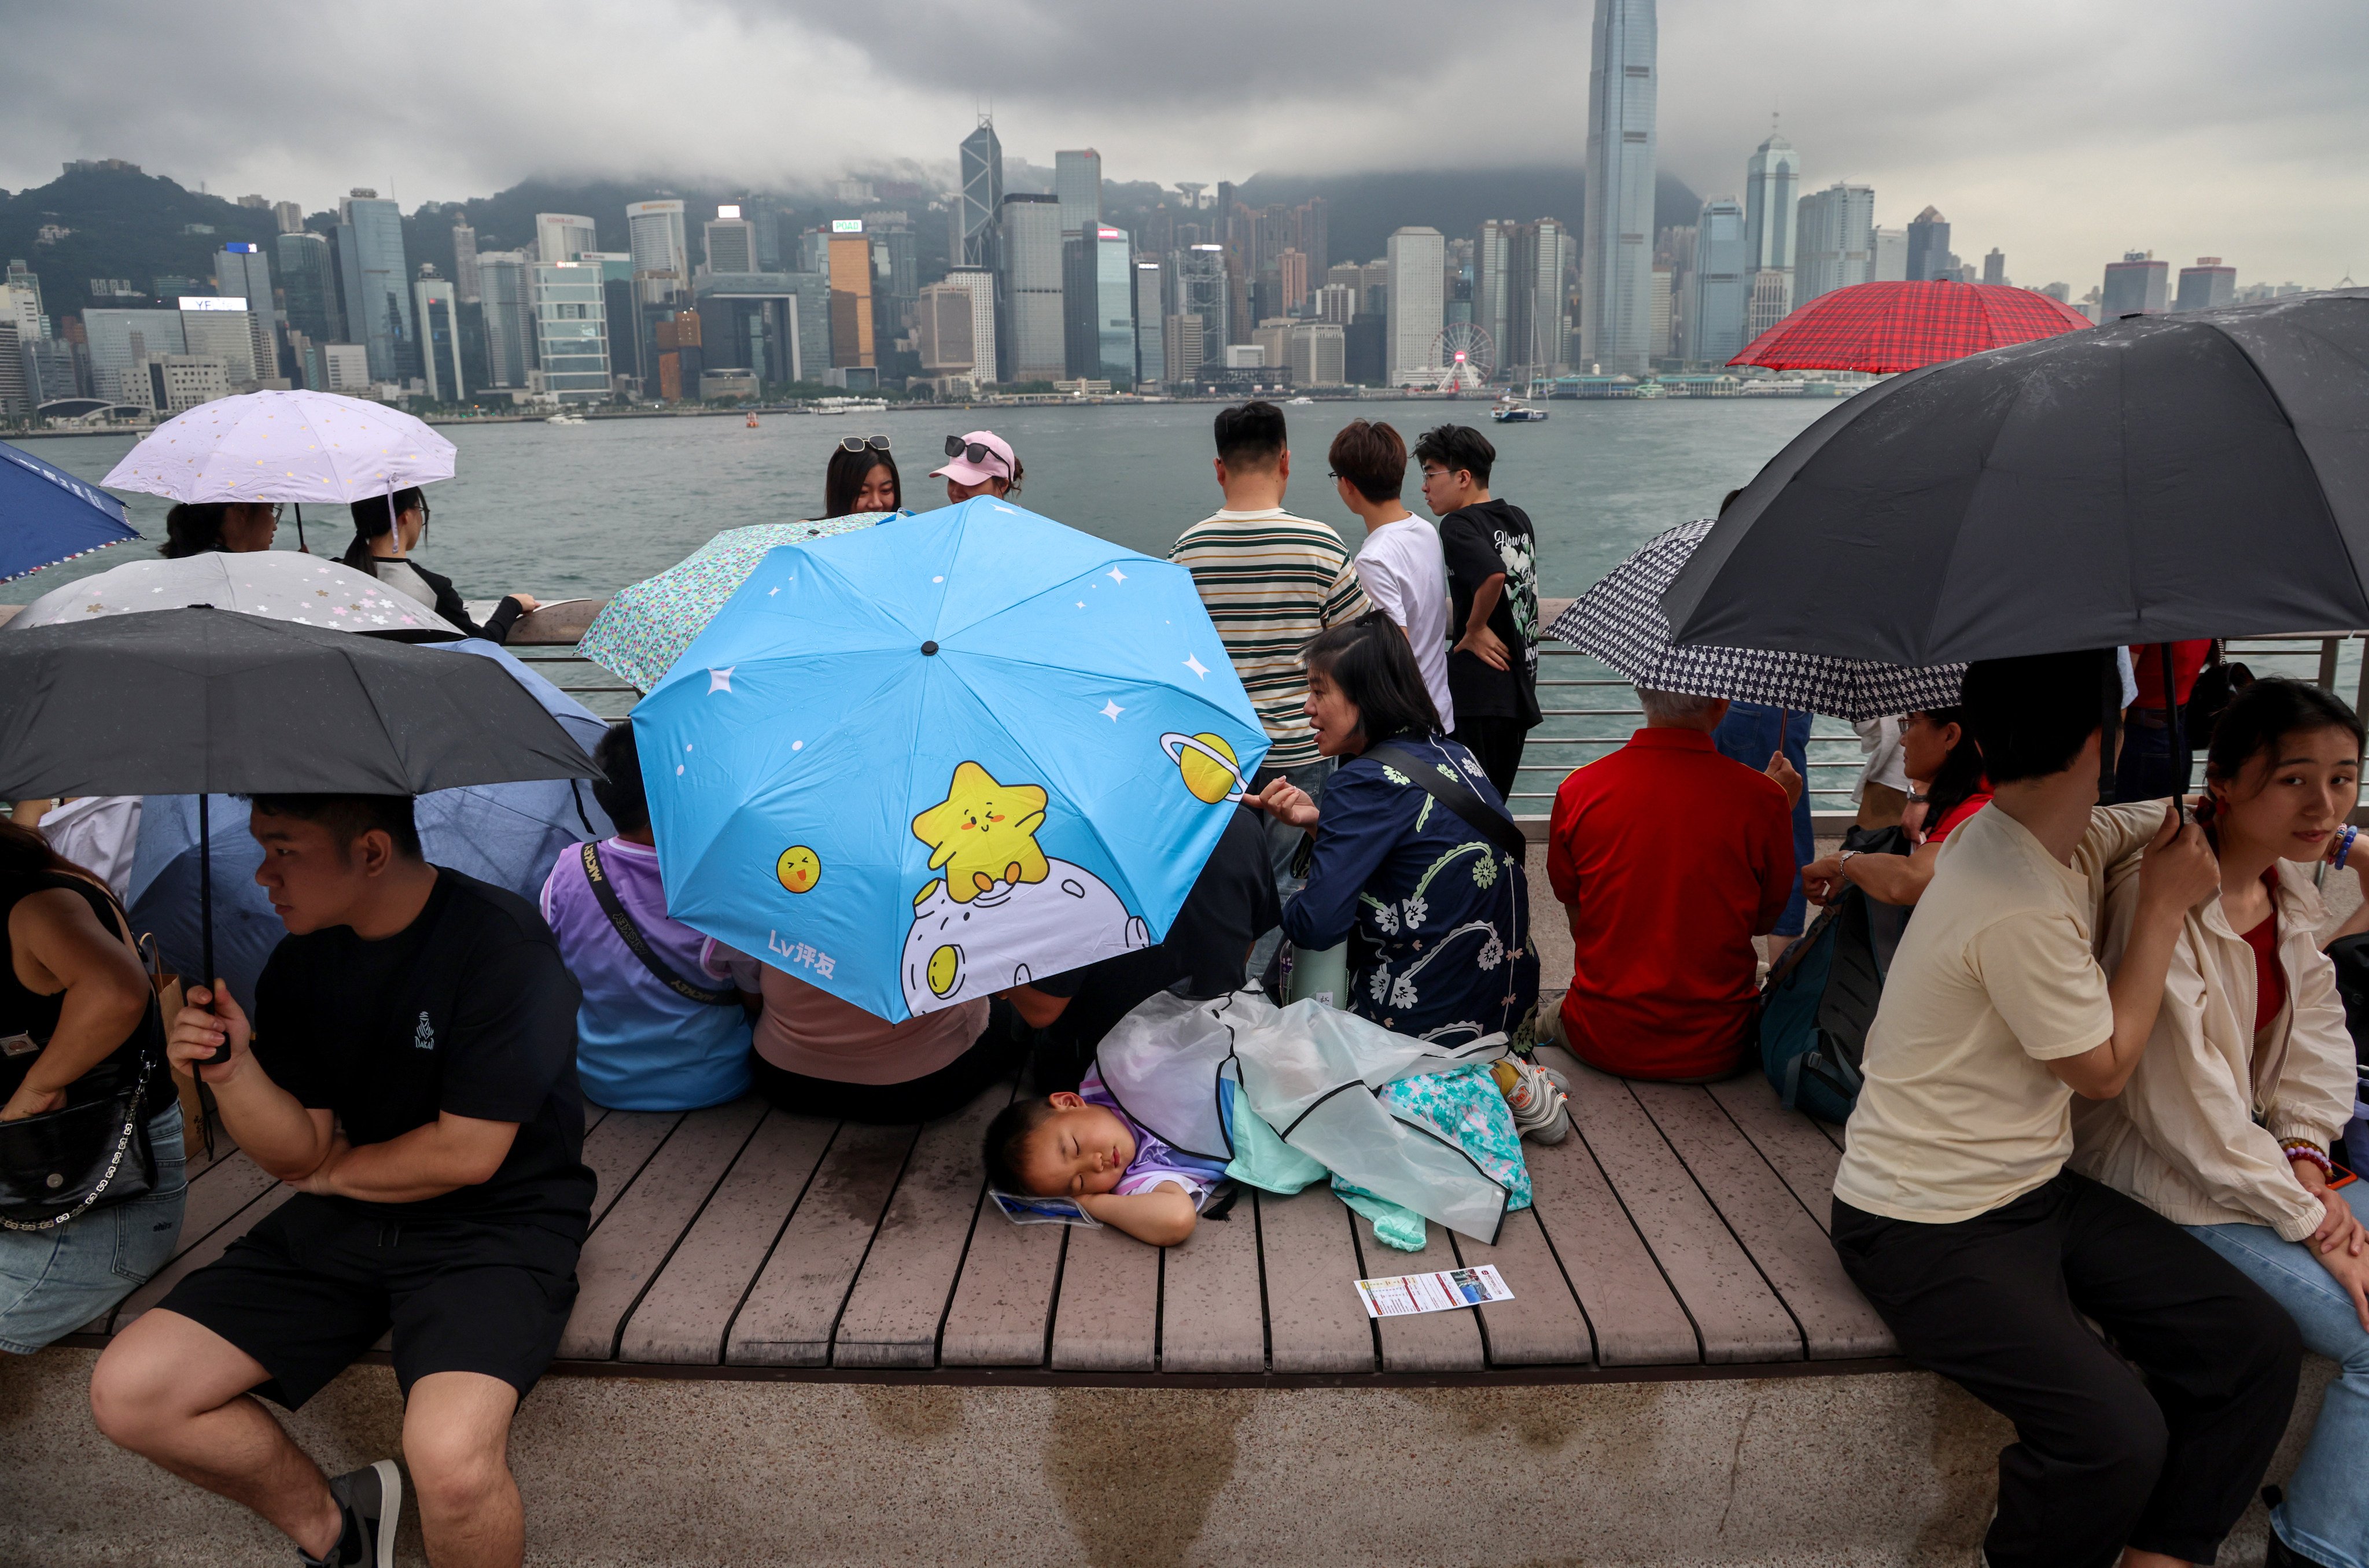 Tourists gather at Hong Kong’s Tsim Sha Tsui waterfront area on a rainy day on May 2. With the Hong Kong economy facing headwinds, much of which are outside its control, Hongkongers need to brace themselves for a few years of hardship. Photo: Jelly Tse